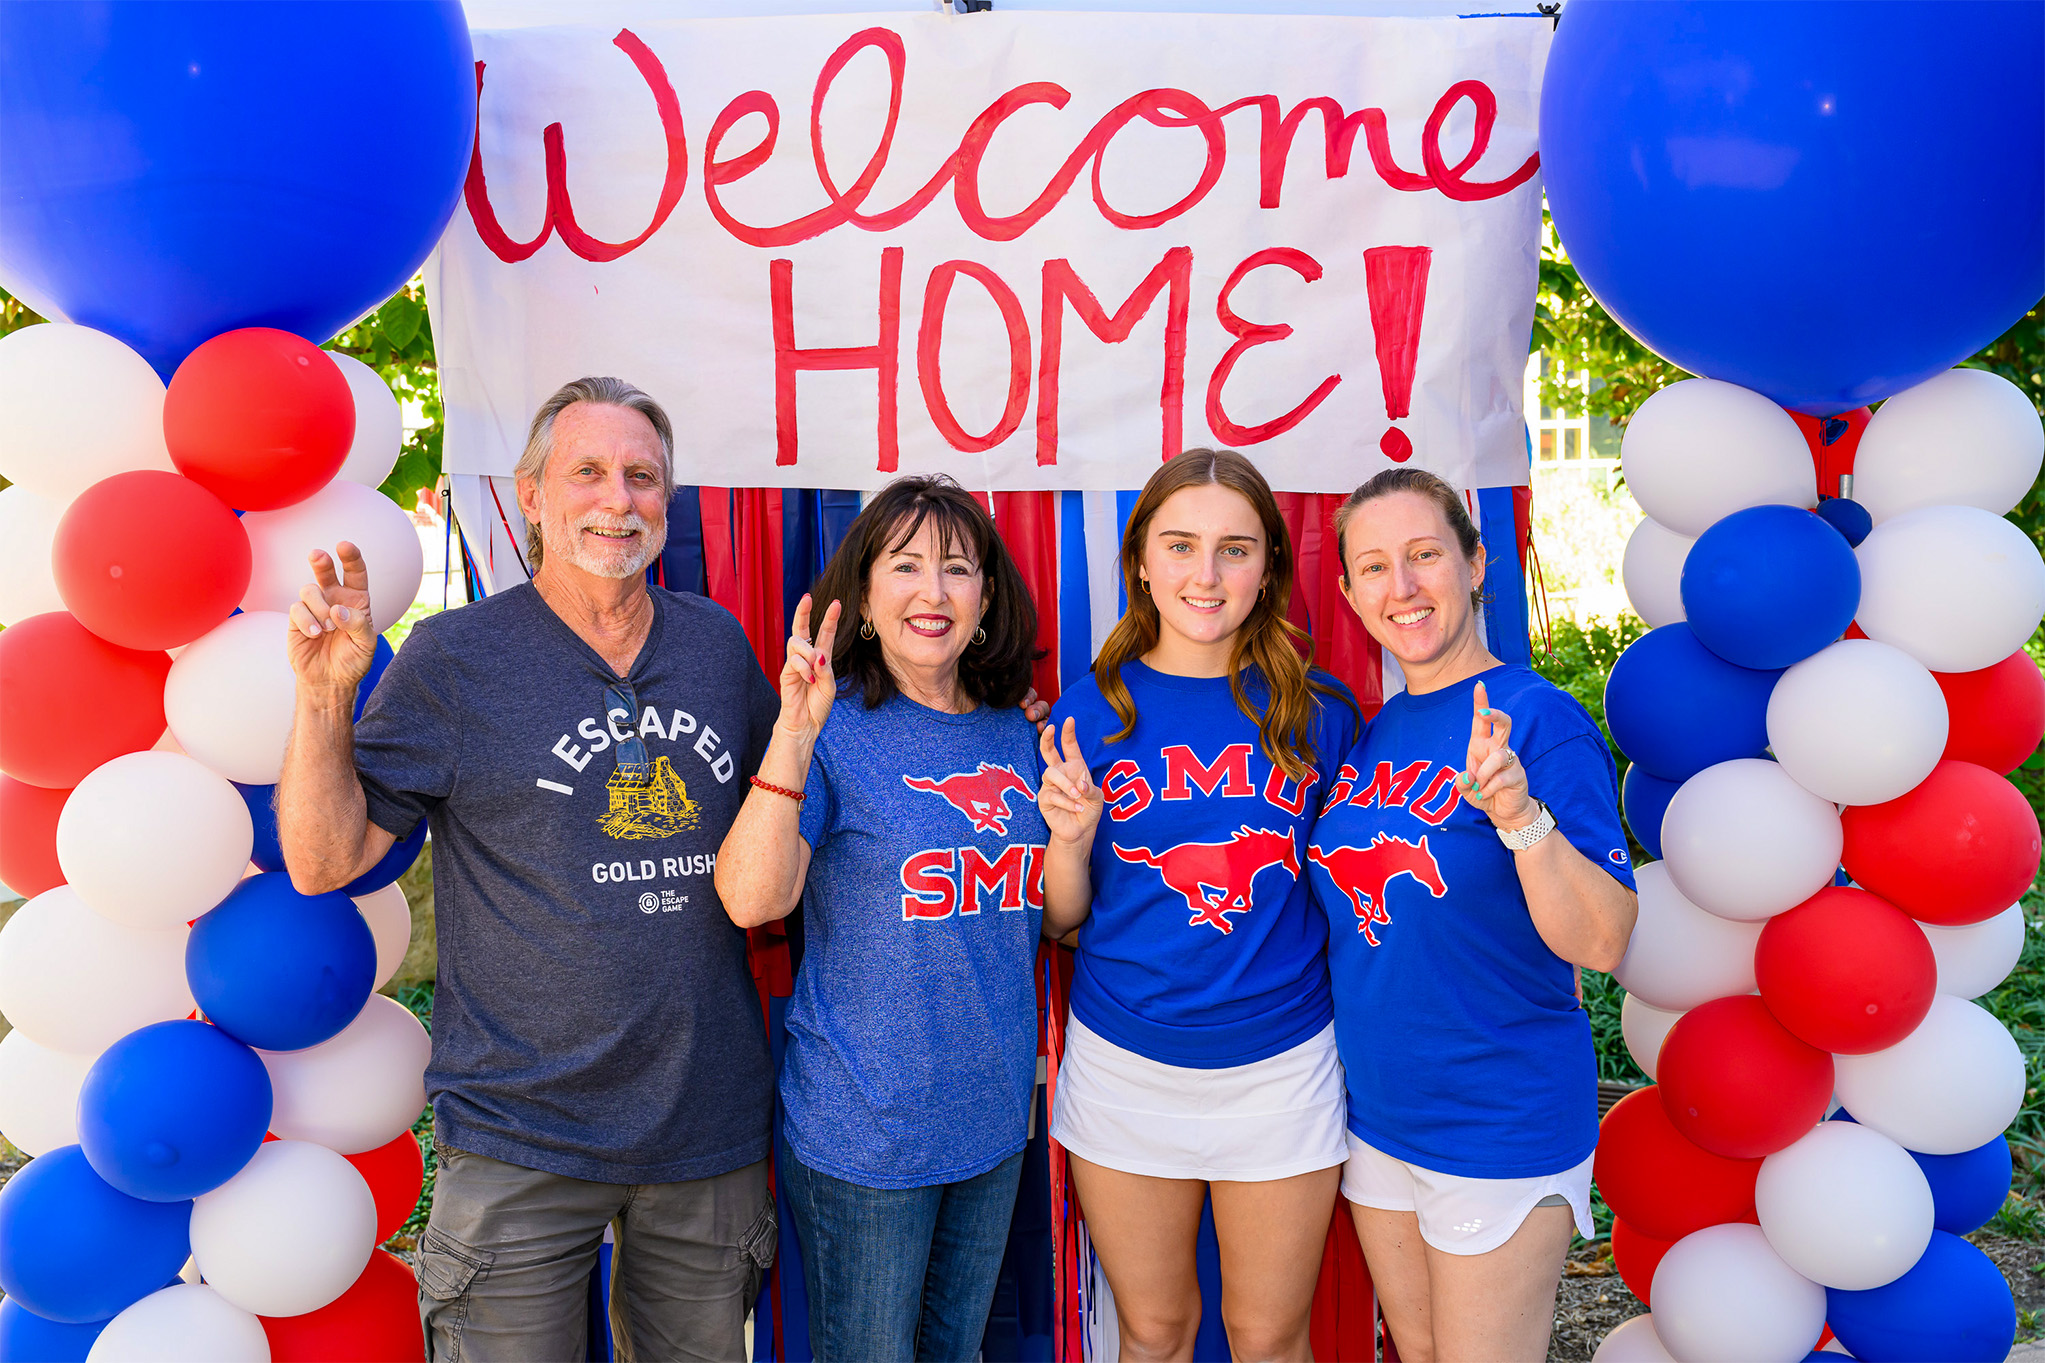 SMU family standing outside holding Pony Up hand sign in front of Welcome Home banner with red, blue, and white balloon towers